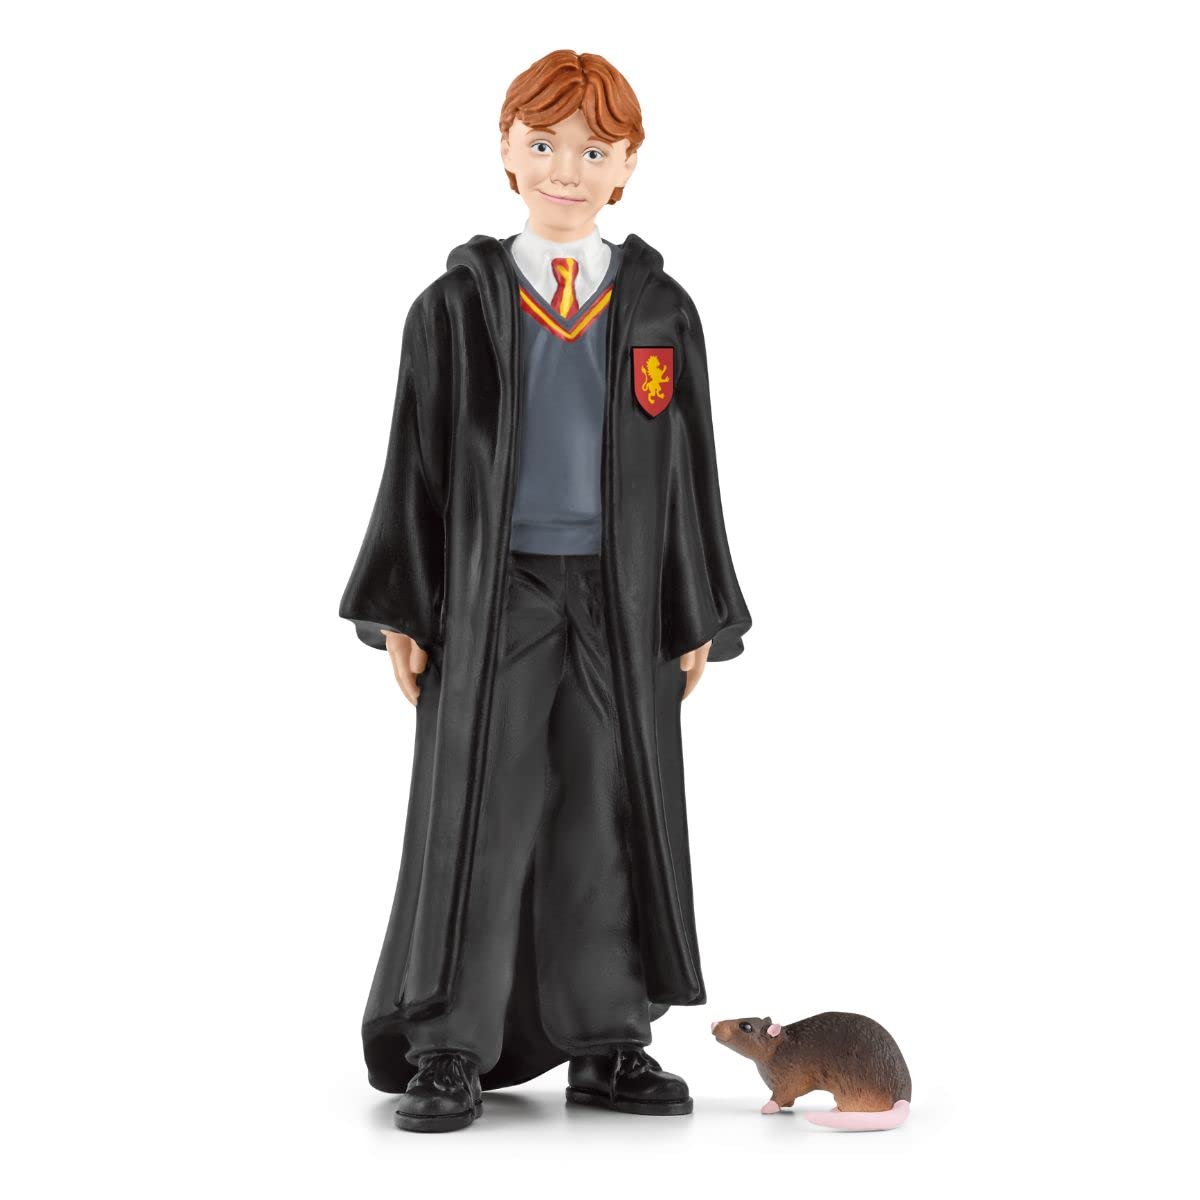 Schleich Wizarding World™ of Harry Potter™ 2-Piece Set with Ron Weasley™ & Scabbers™ Collectible Figurines for Kids Ages 6+